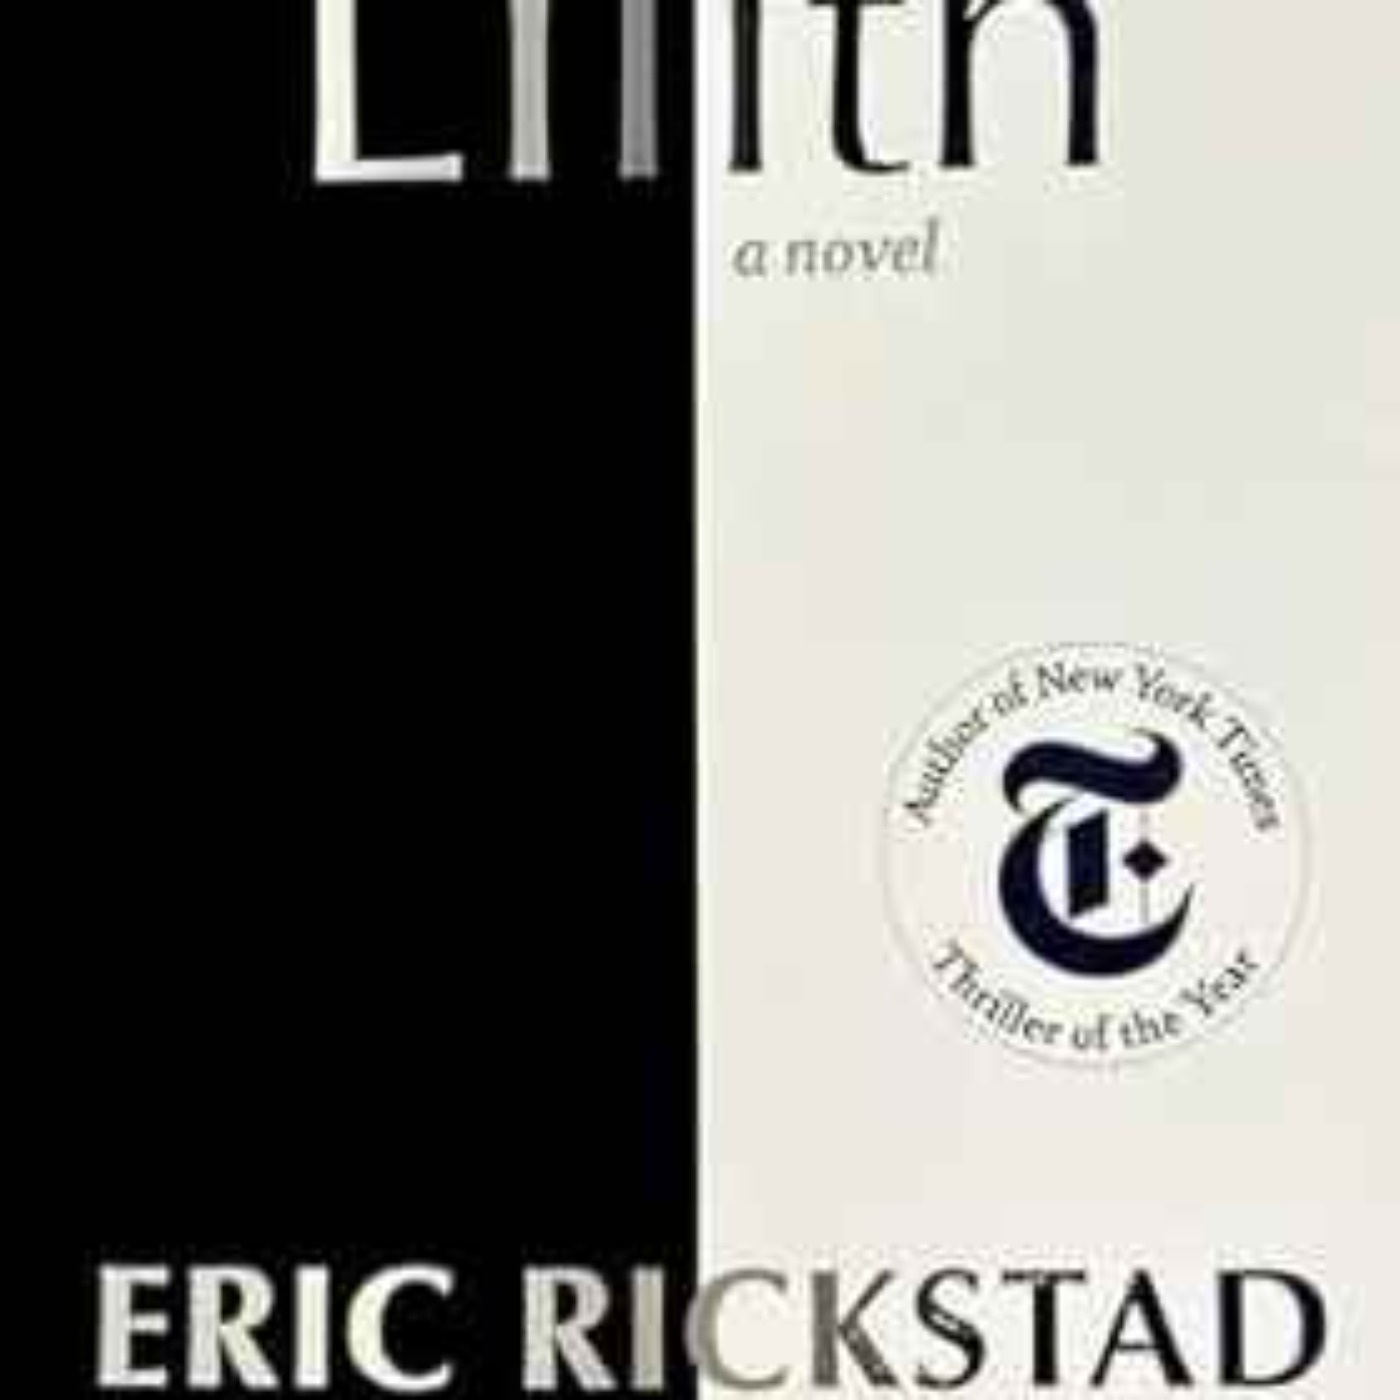 cover art for Eric Rickstad -  Lilith 